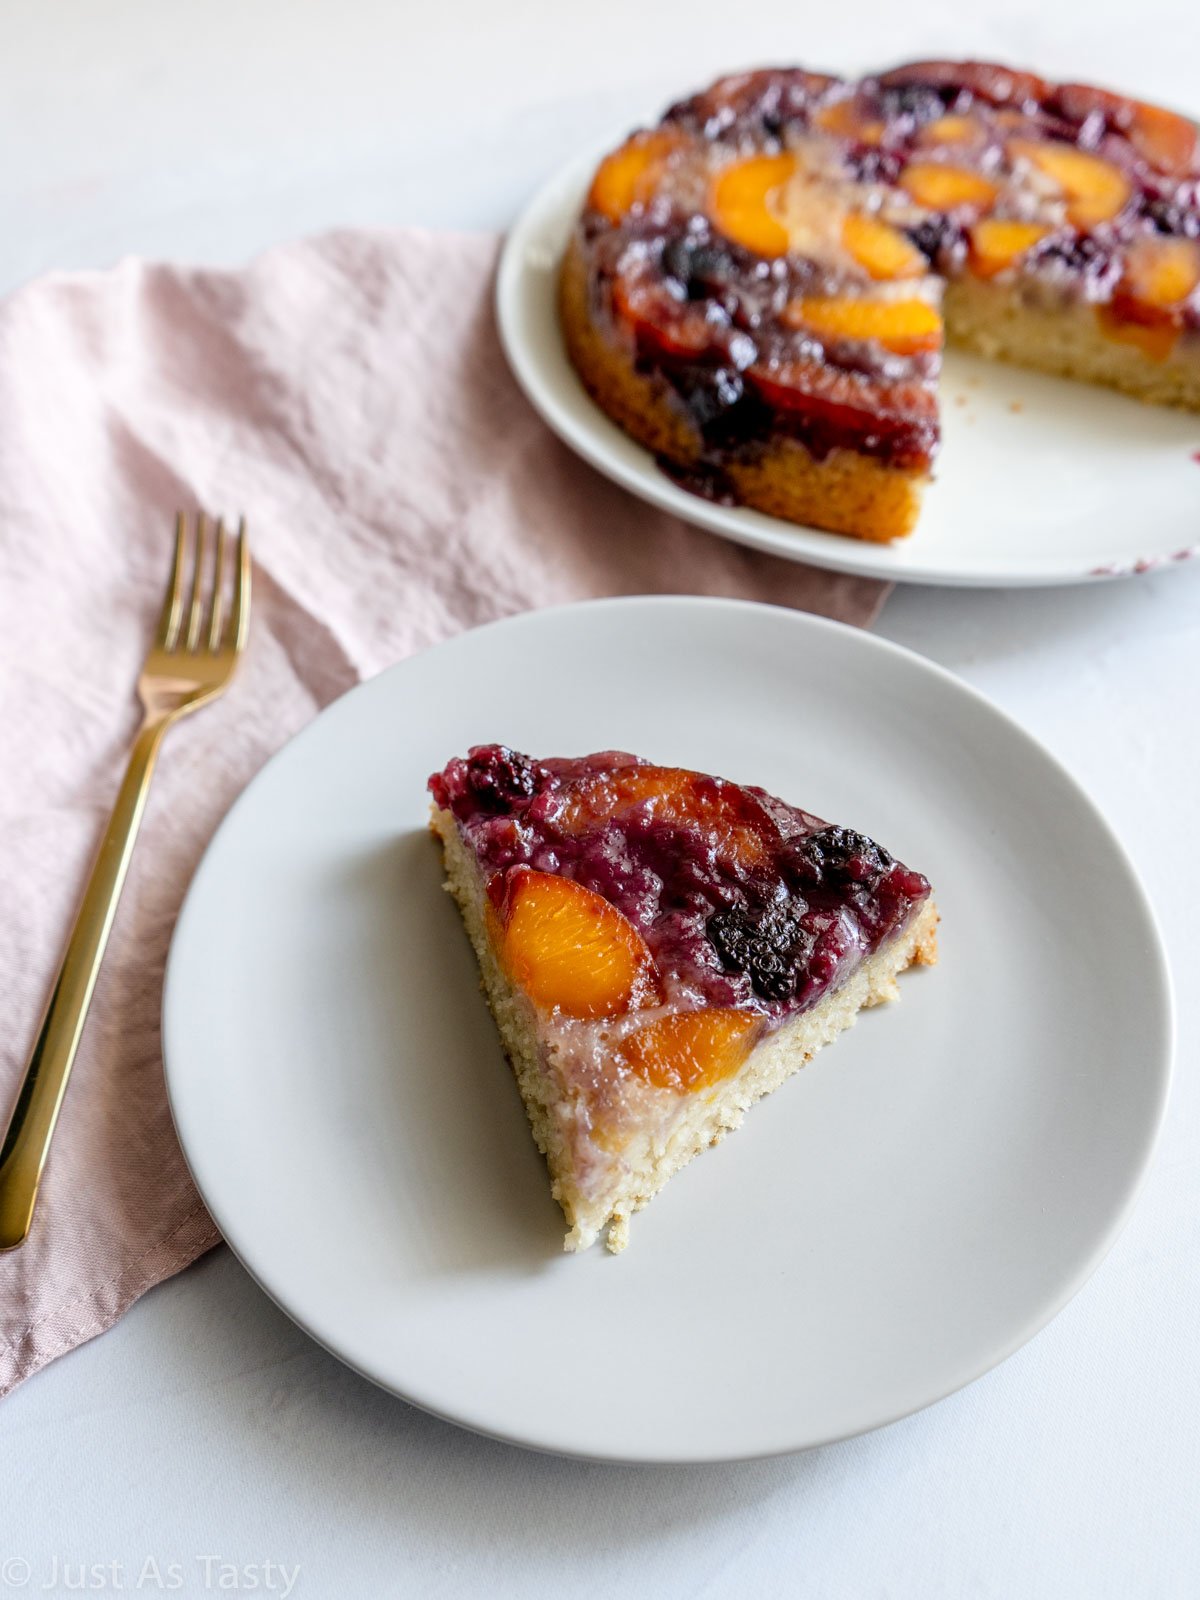 Slice of peach upside down cake on a plate.